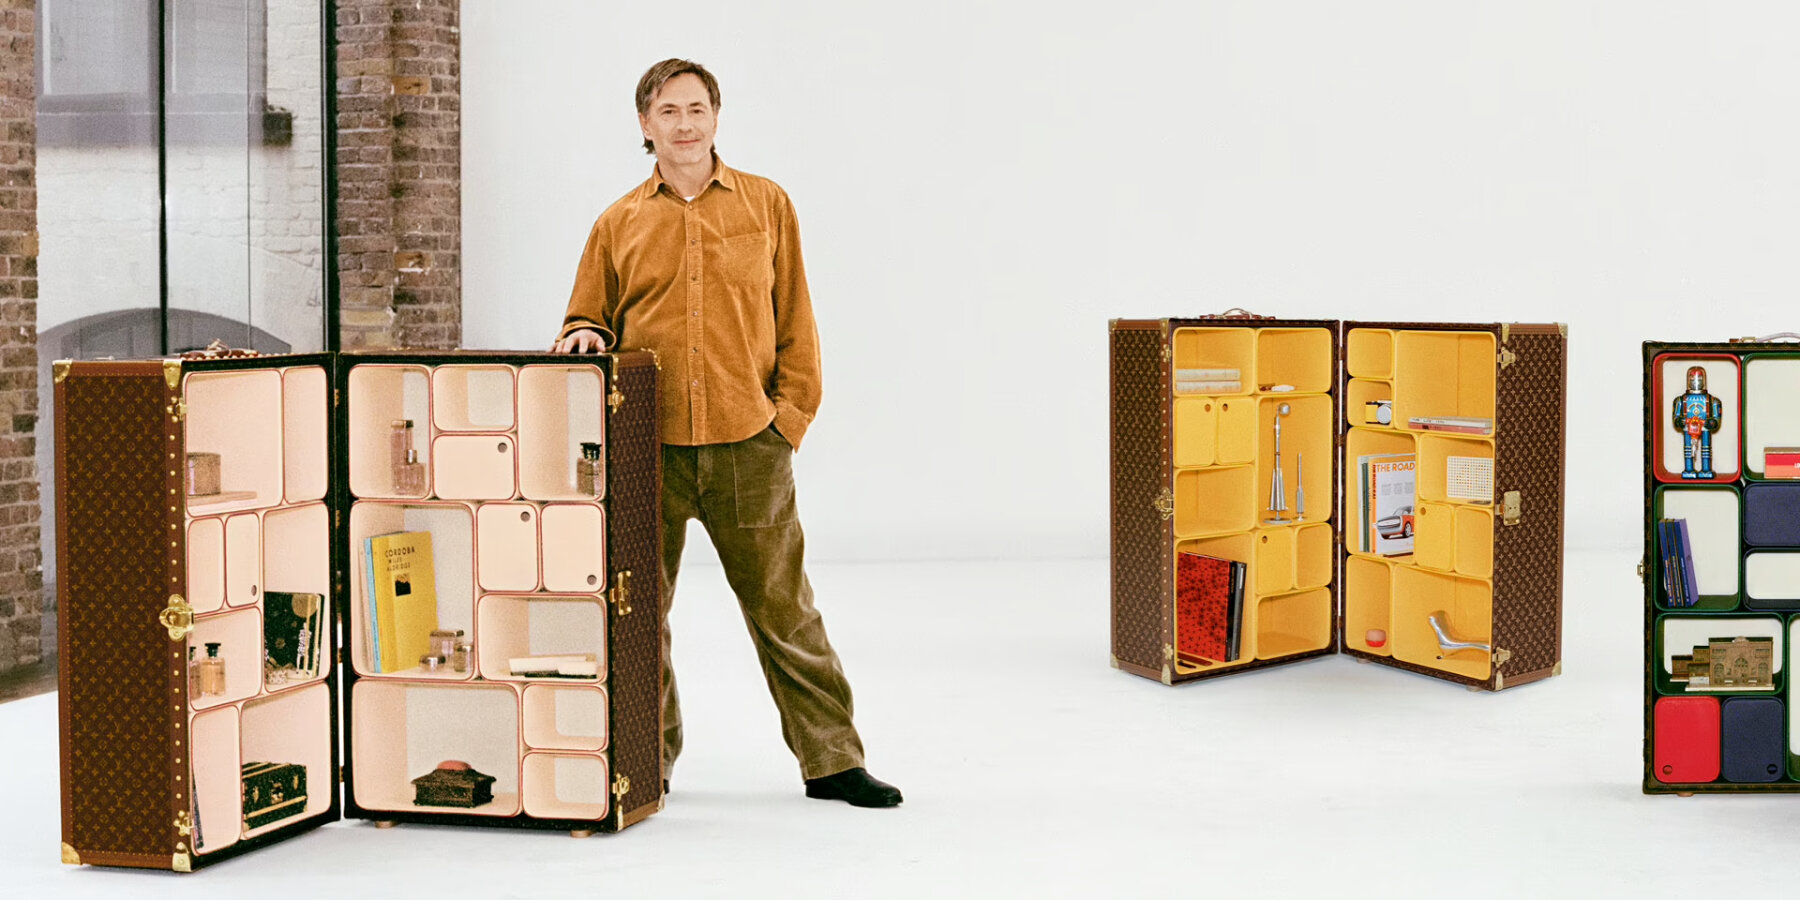 A Cabinet of Curiosities by Marc Newson